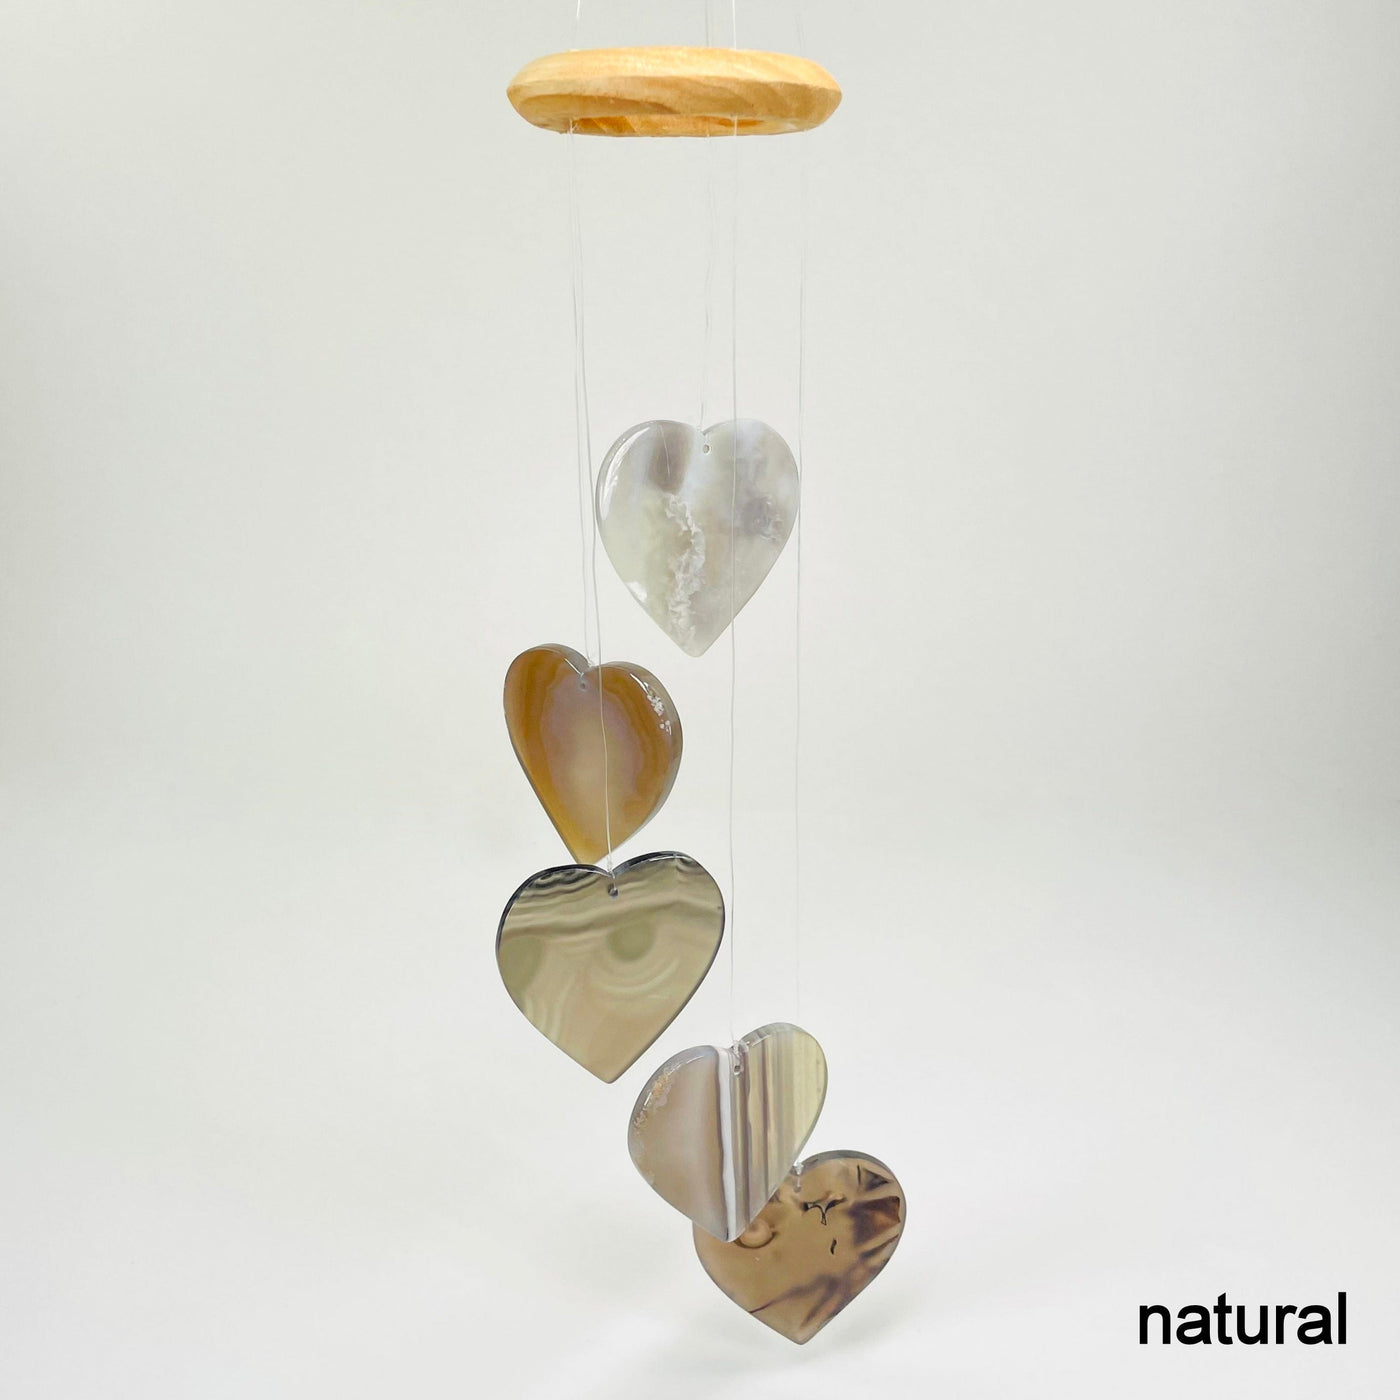 one natural agate heart wind chime hanging in front of white background